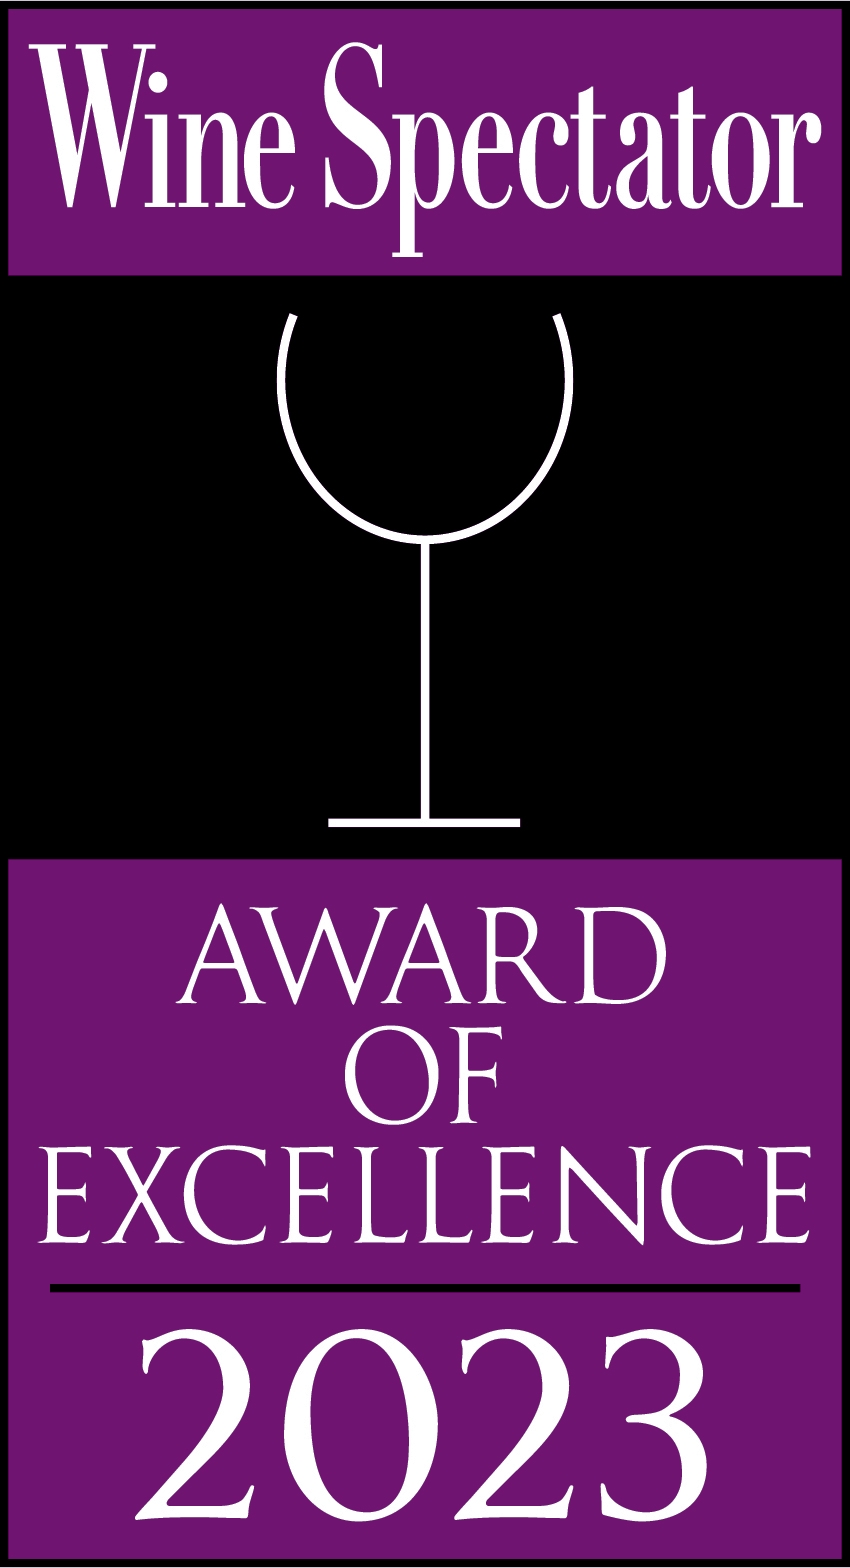 Wine Spectator 2023 - Award of Excellence